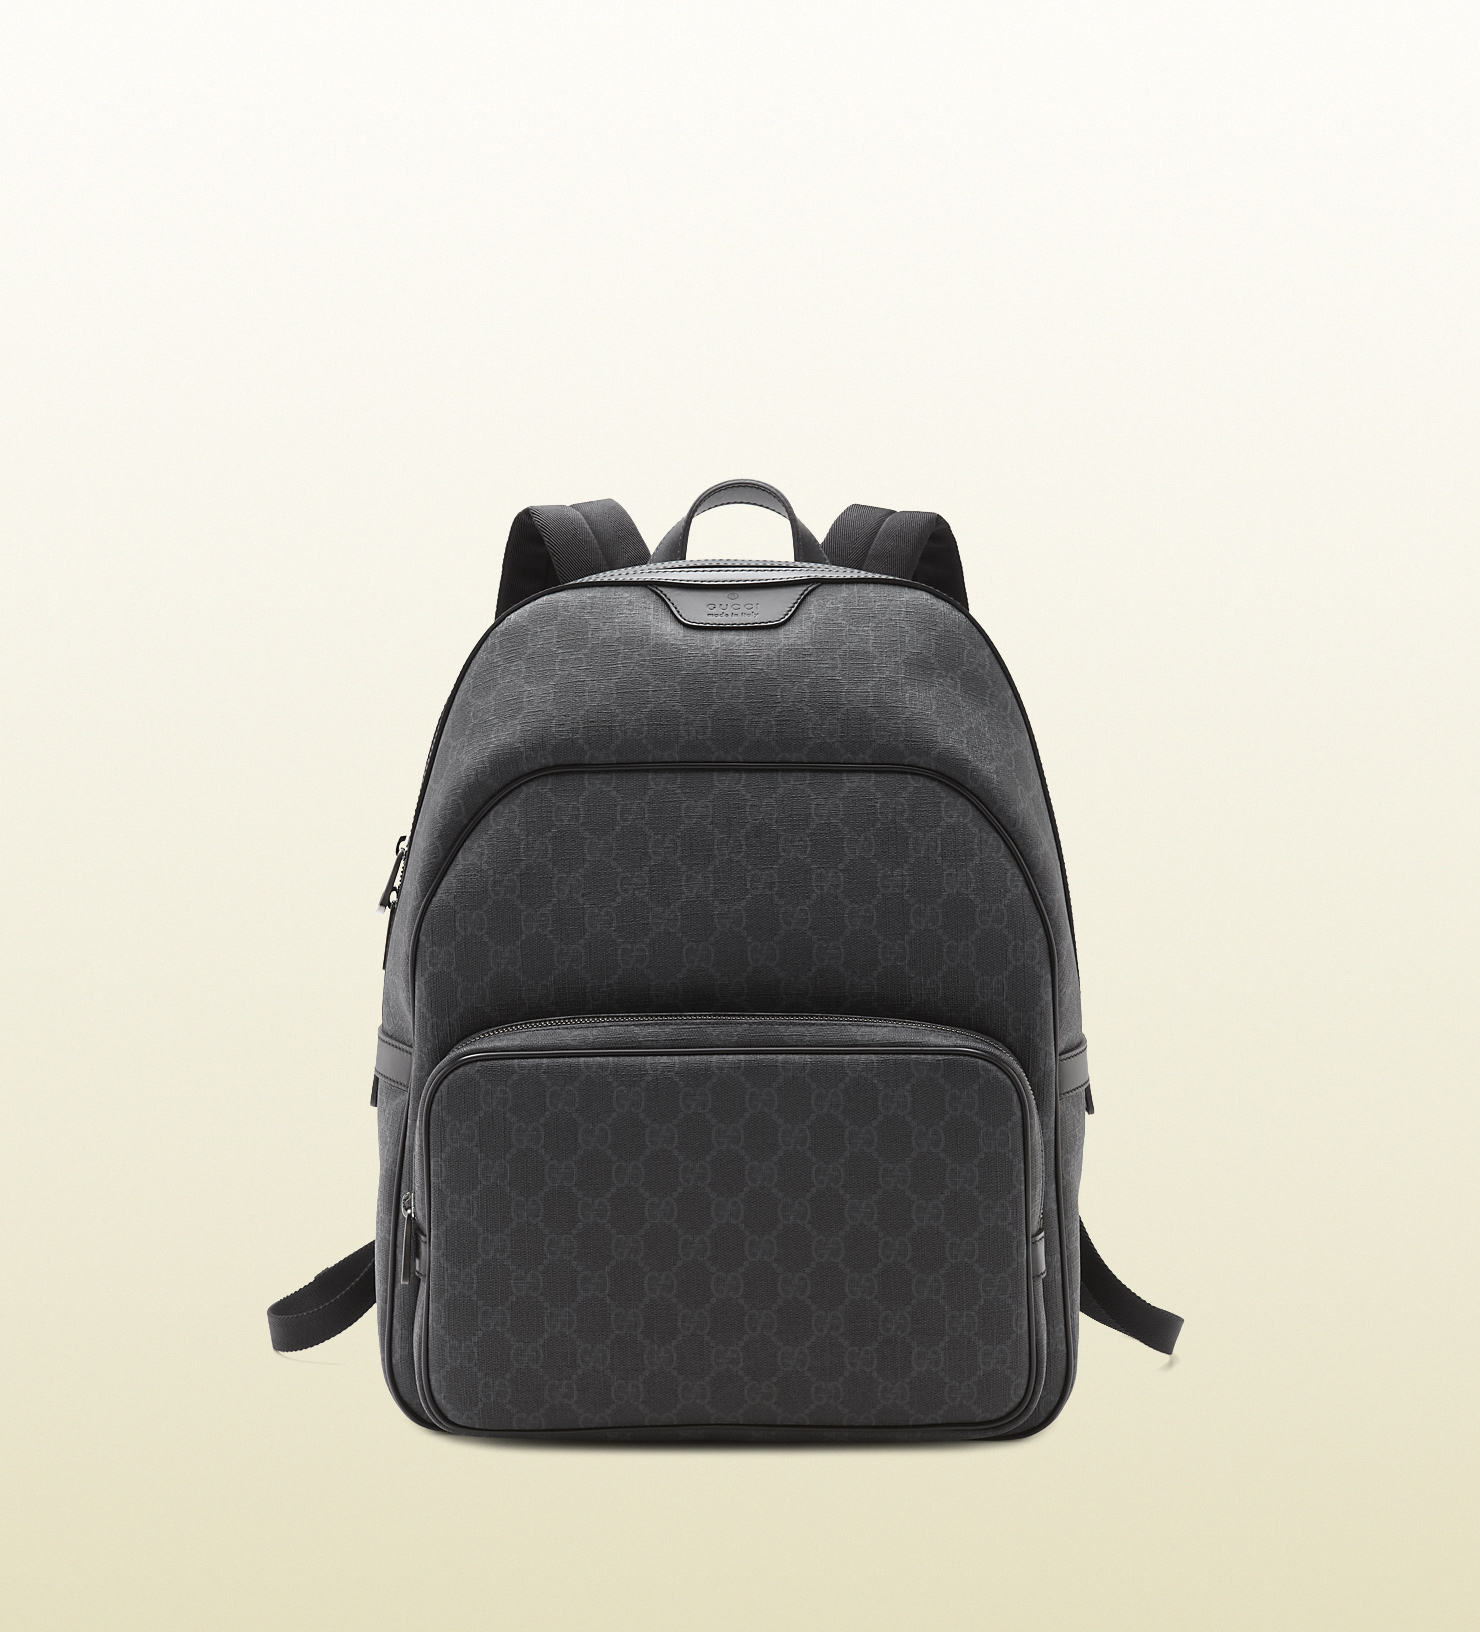 Lyst - Gucci Gg Supreme Canvas Backpack in Gray for Men